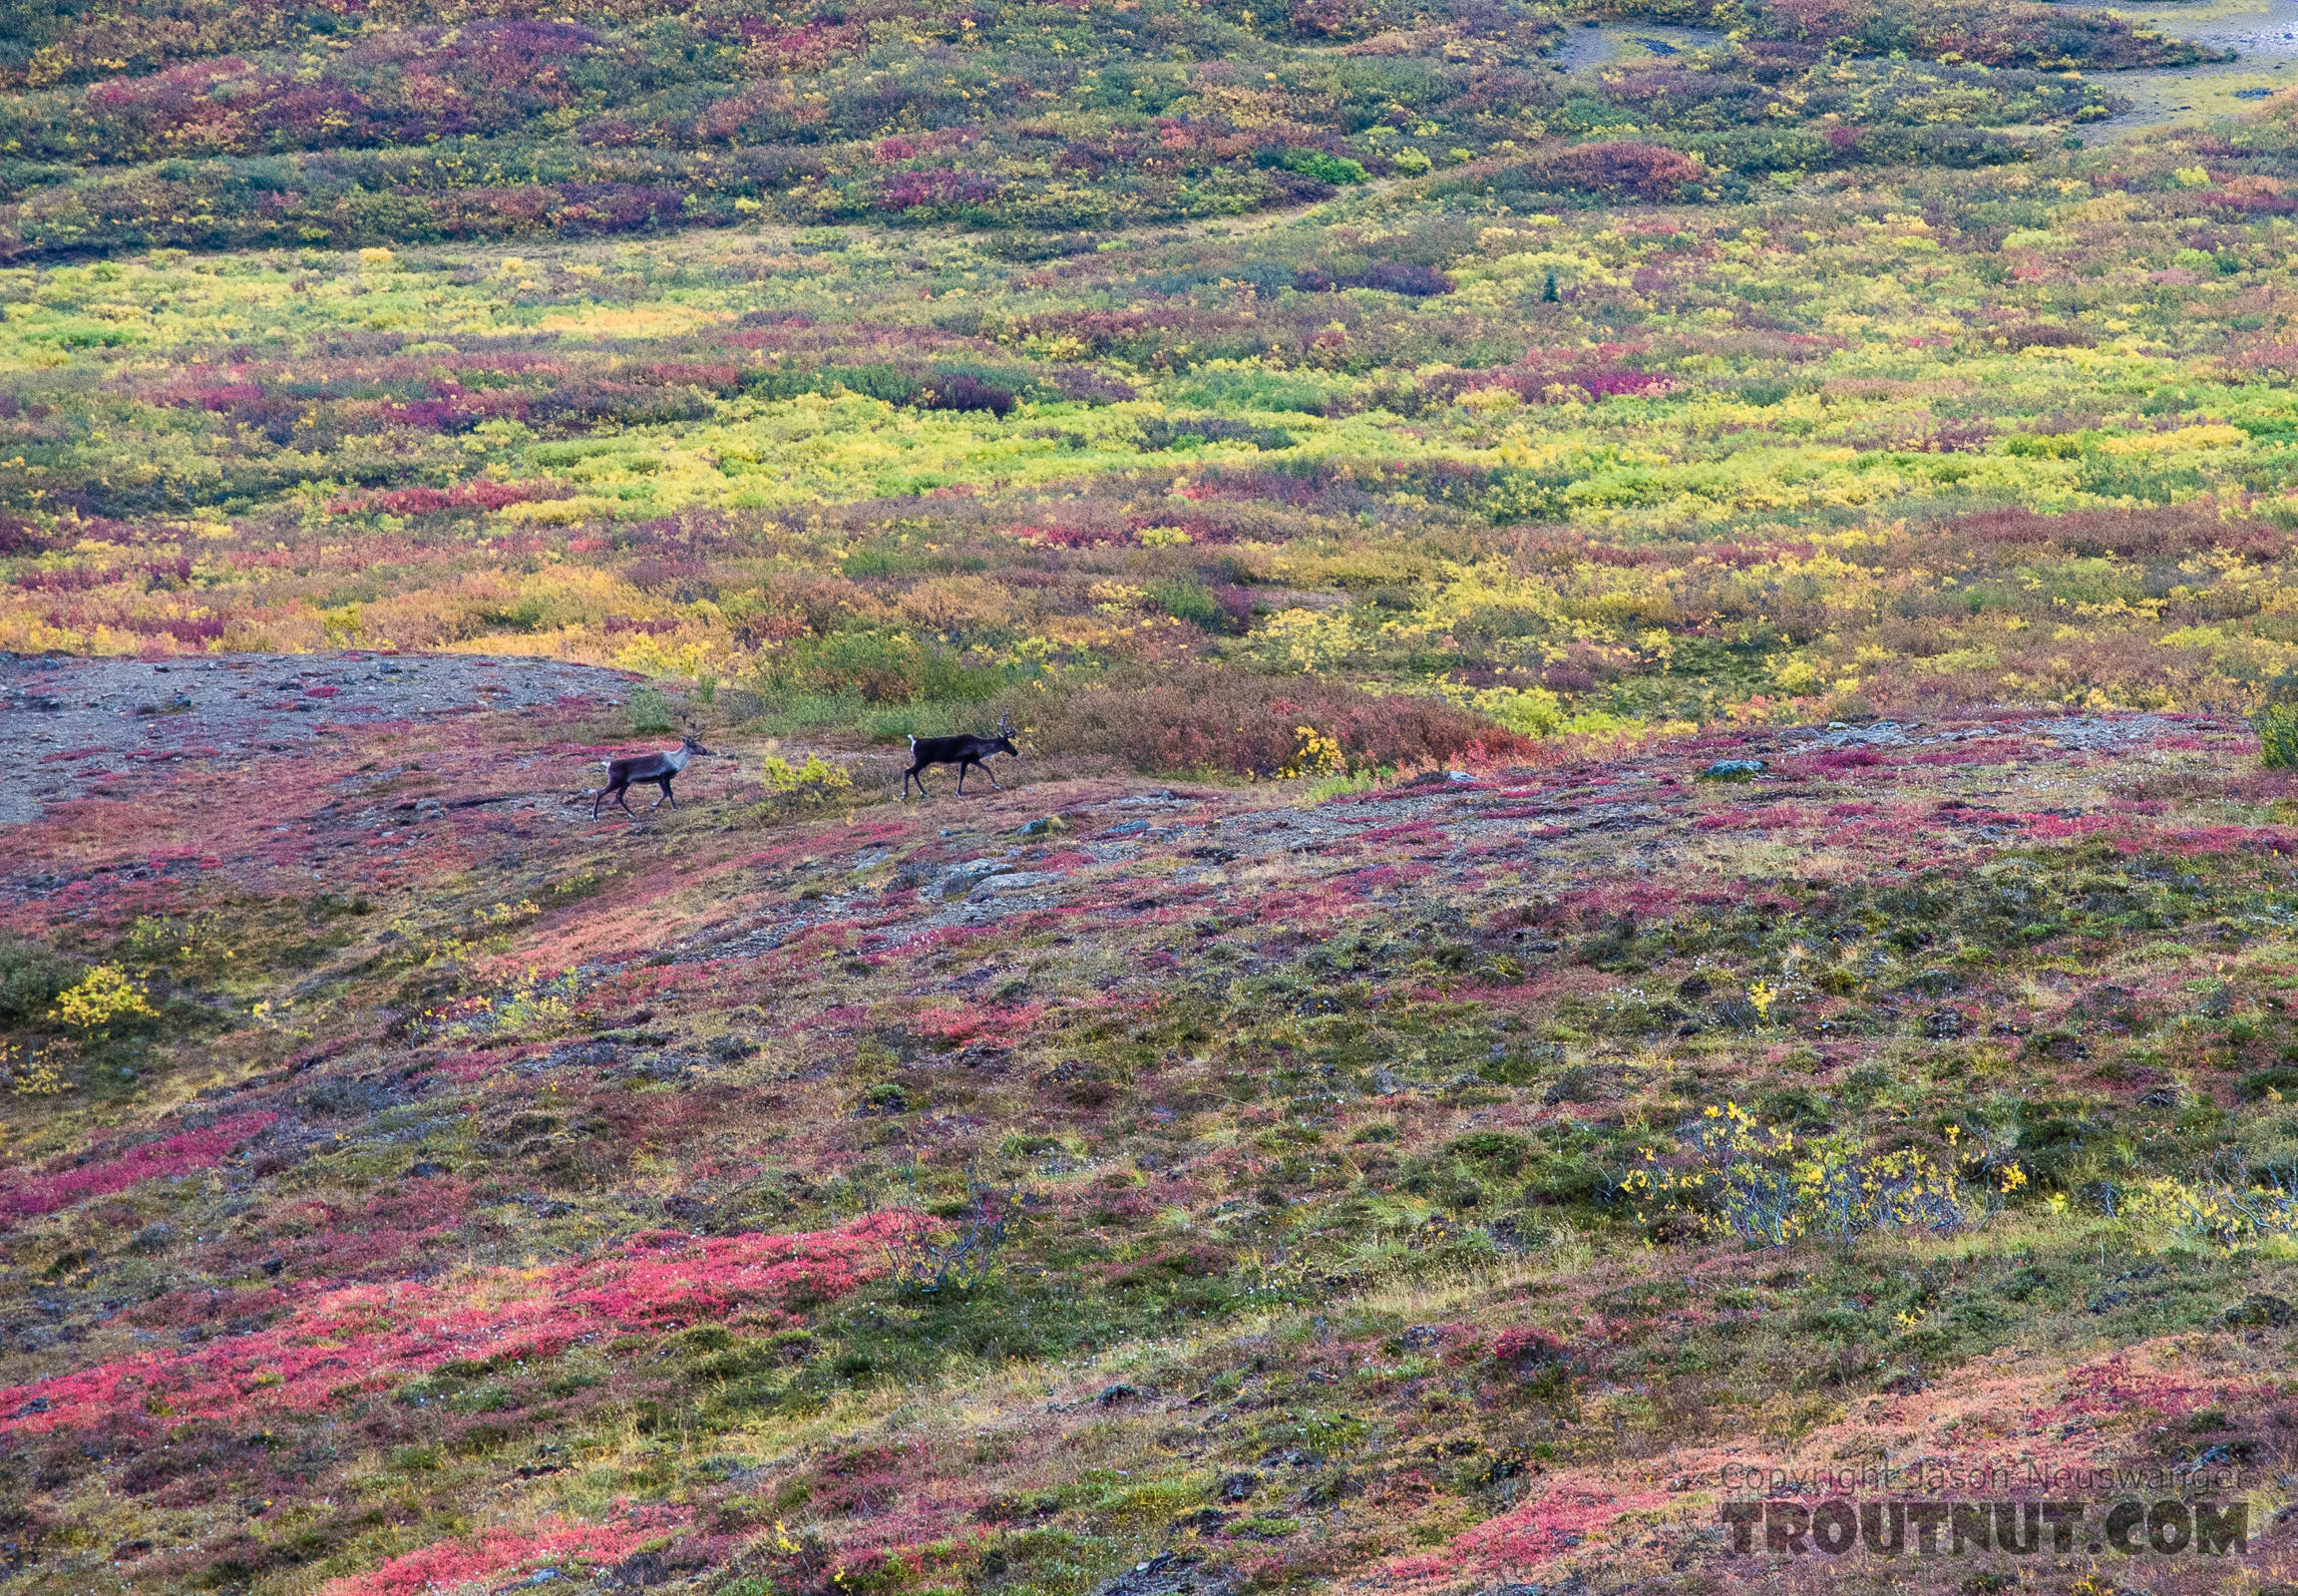 Two cow caribou. As caribou often do, these two cows appeared out of nowhere in the middle of a valley bottom we'd been watching for an hour. From Clearwater Mountains in Alaska.